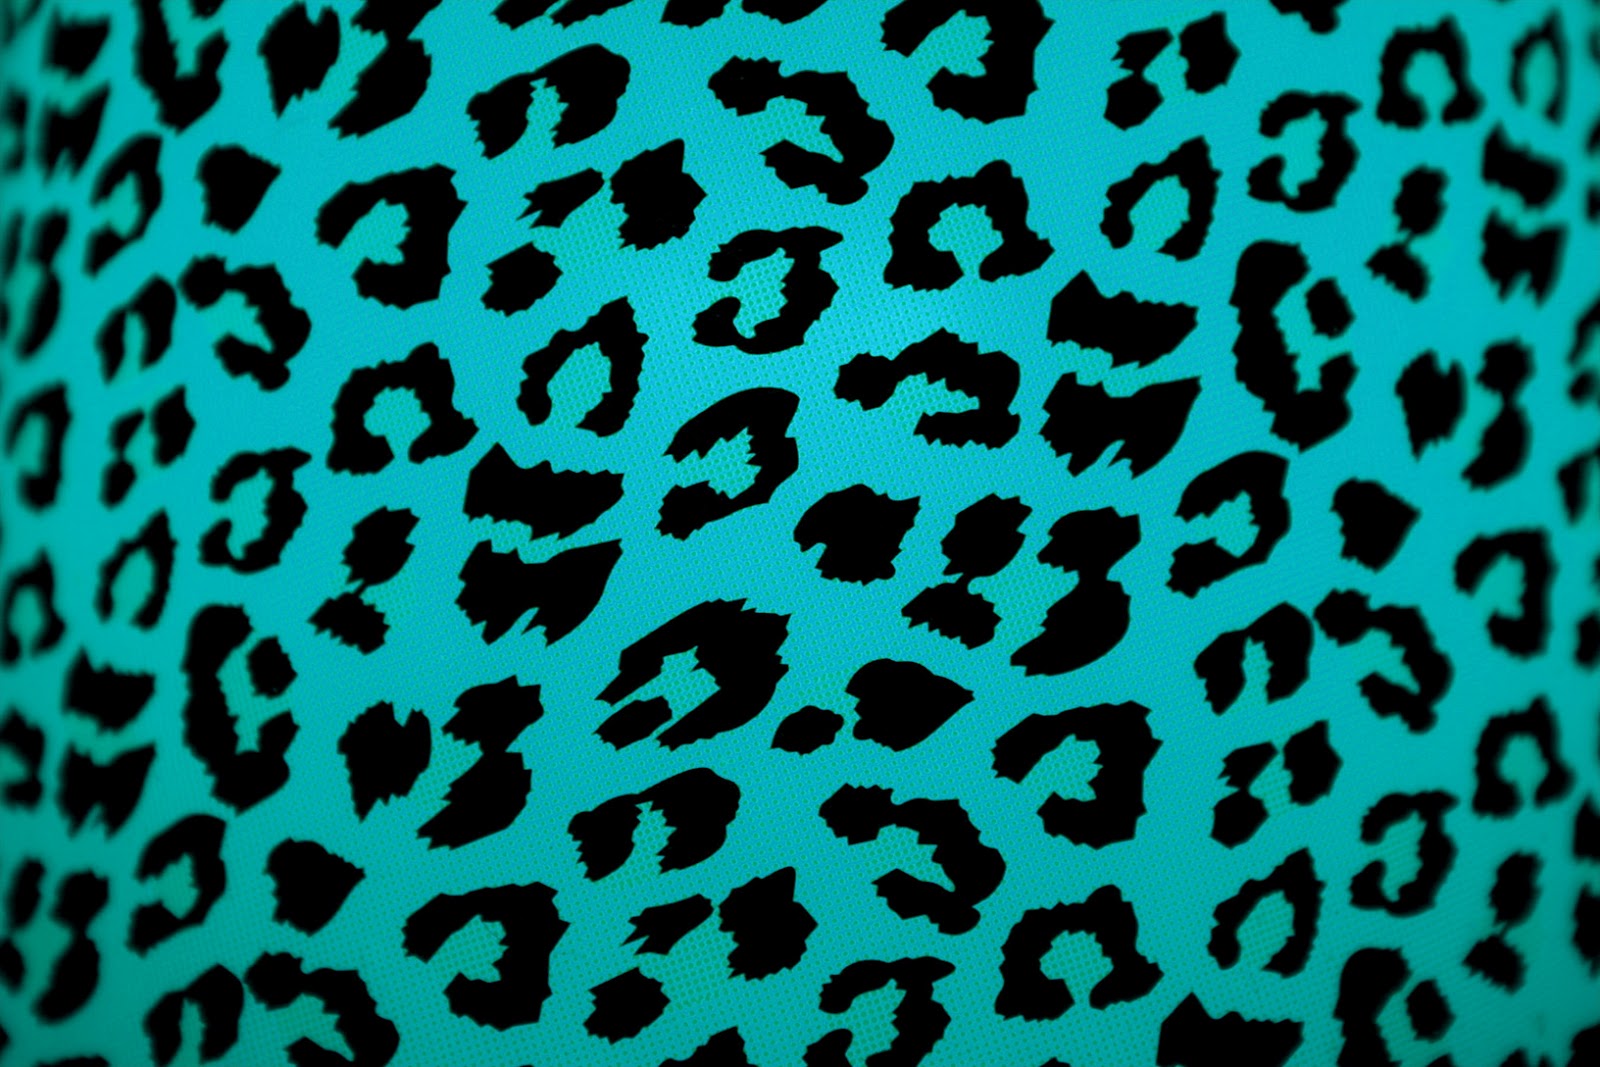 Leopard Print Pattern Background For PowerPoint, Google Slide Templates -  PPT Backgrounds